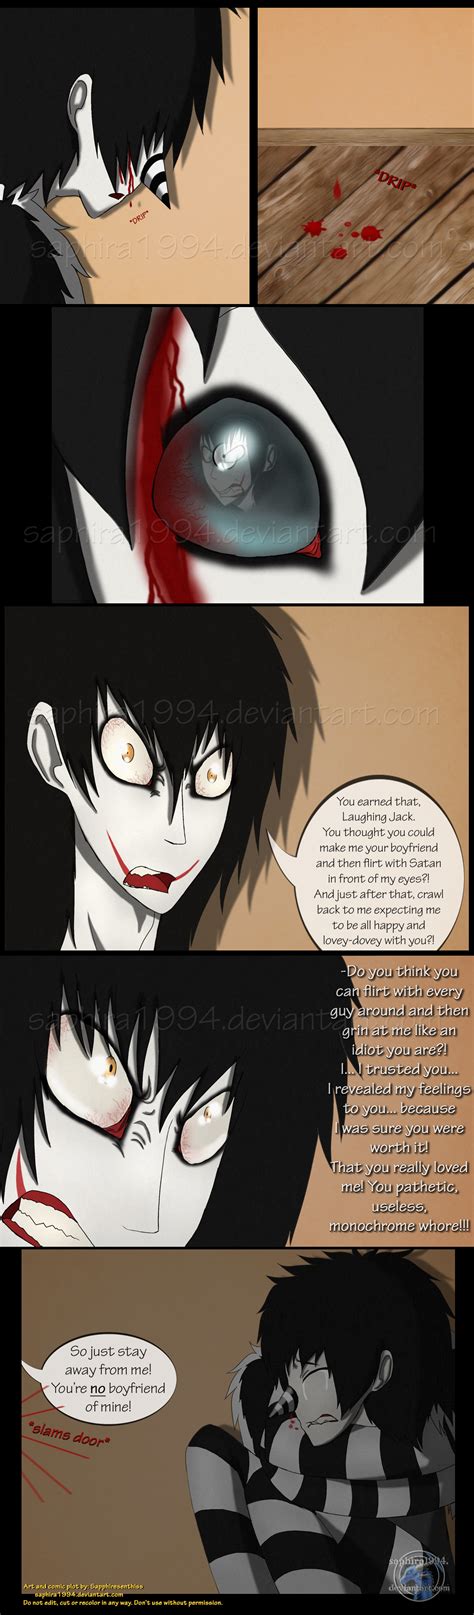 Adventures With Jeff The Killer Page 79 By Sapphiresenthiss On Deviantart